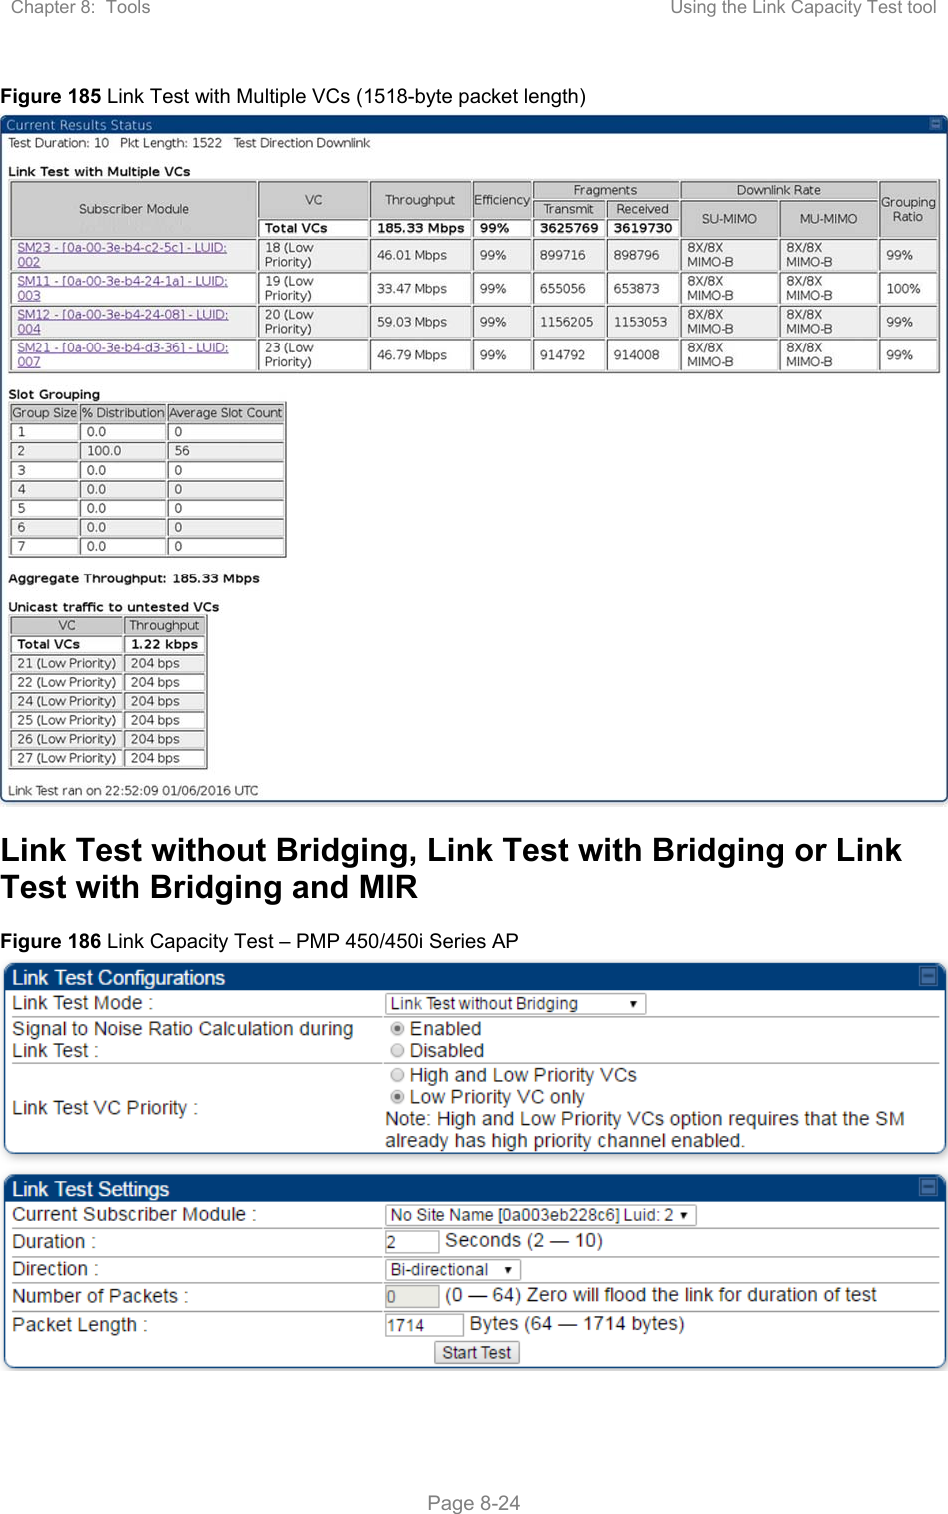 Chapter 8:  Tools  Using the Link Capacity Test tool   Page 8-24 Figure 185 Link Test with Multiple VCs (1518-byte packet length)  Link Test without Bridging, Link Test with Bridging or Link Test with Bridging and MIR Figure 186 Link Capacity Test – PMP 450/450i Series AP  